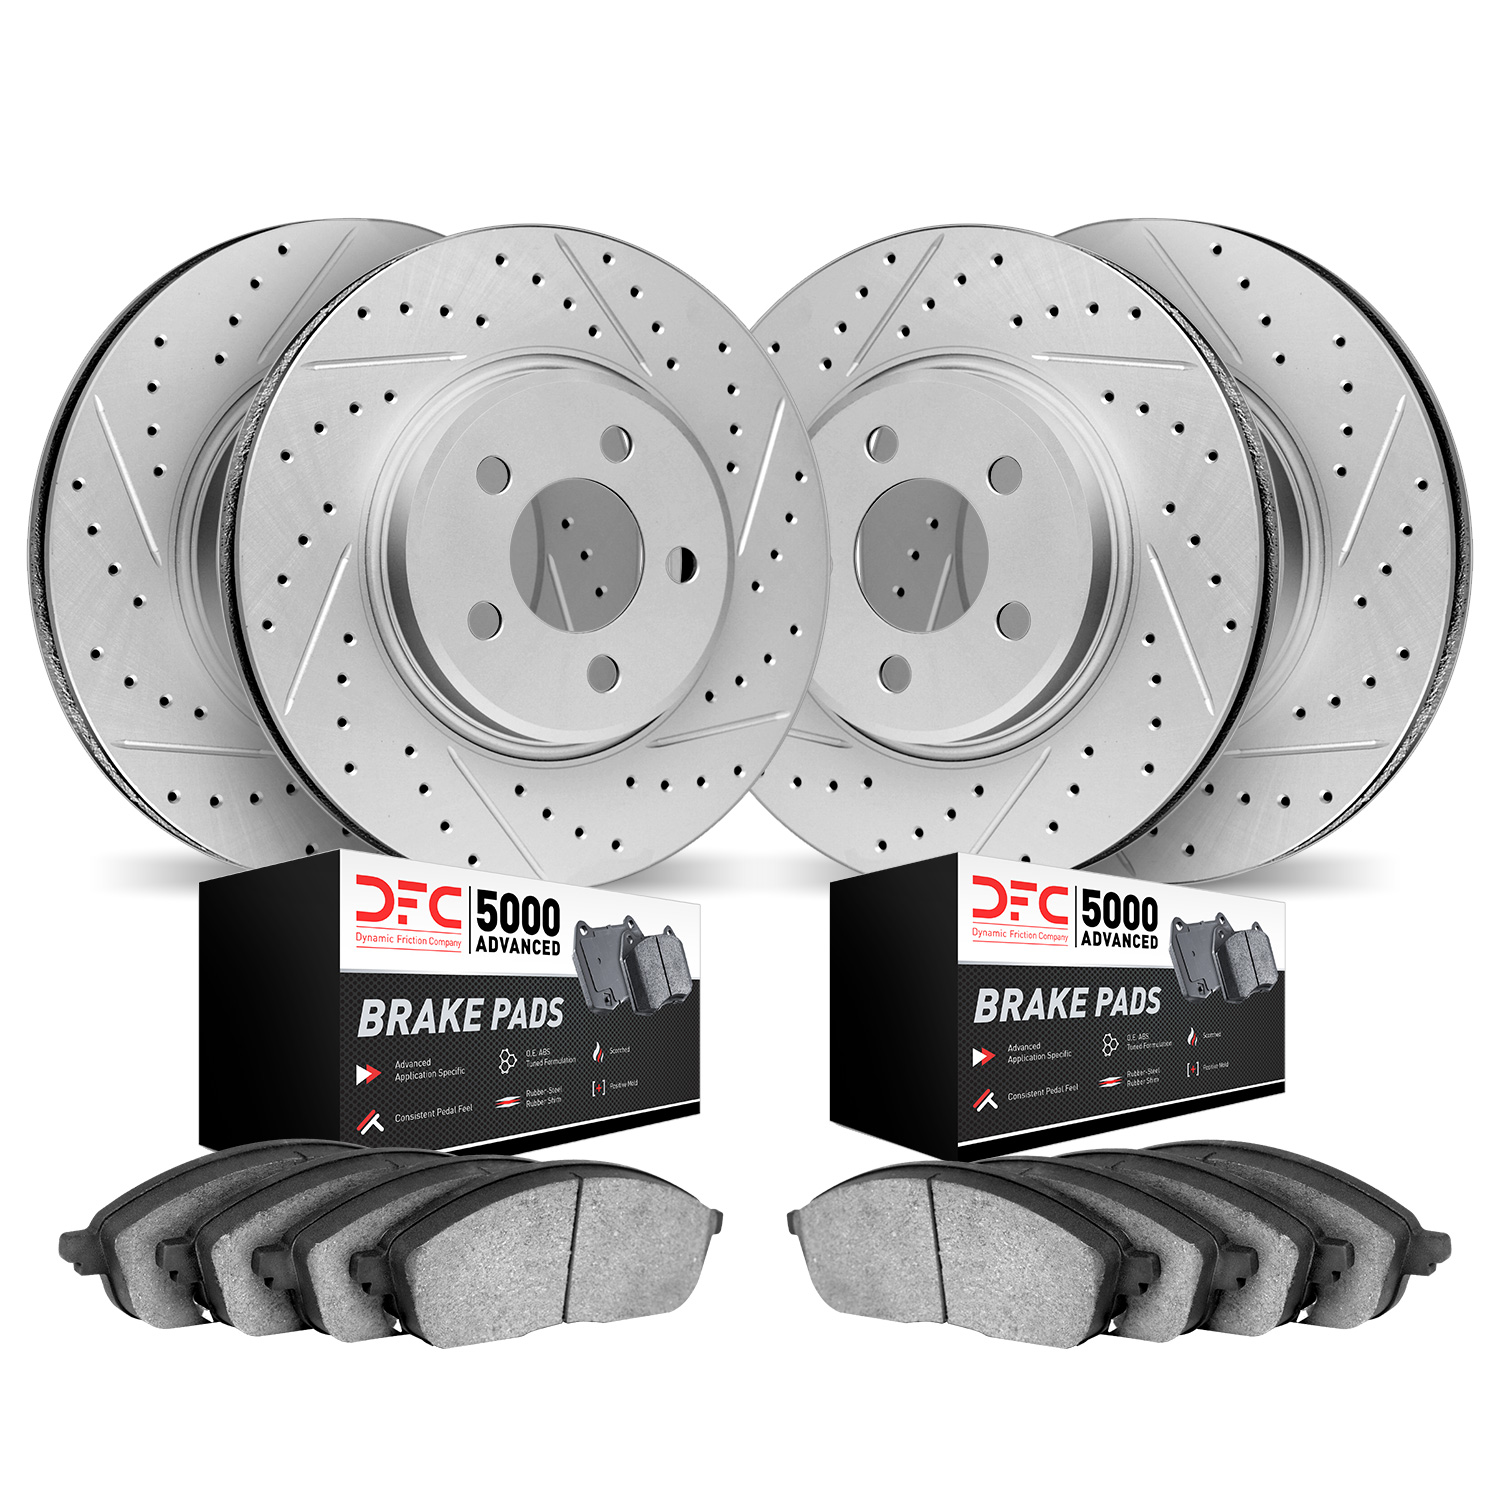 2504-31057 Geoperformance Drilled/Slotted Rotors w/5000 Advanced Brake Pads Kit, 2011-2014 BMW, Position: Front and Rear